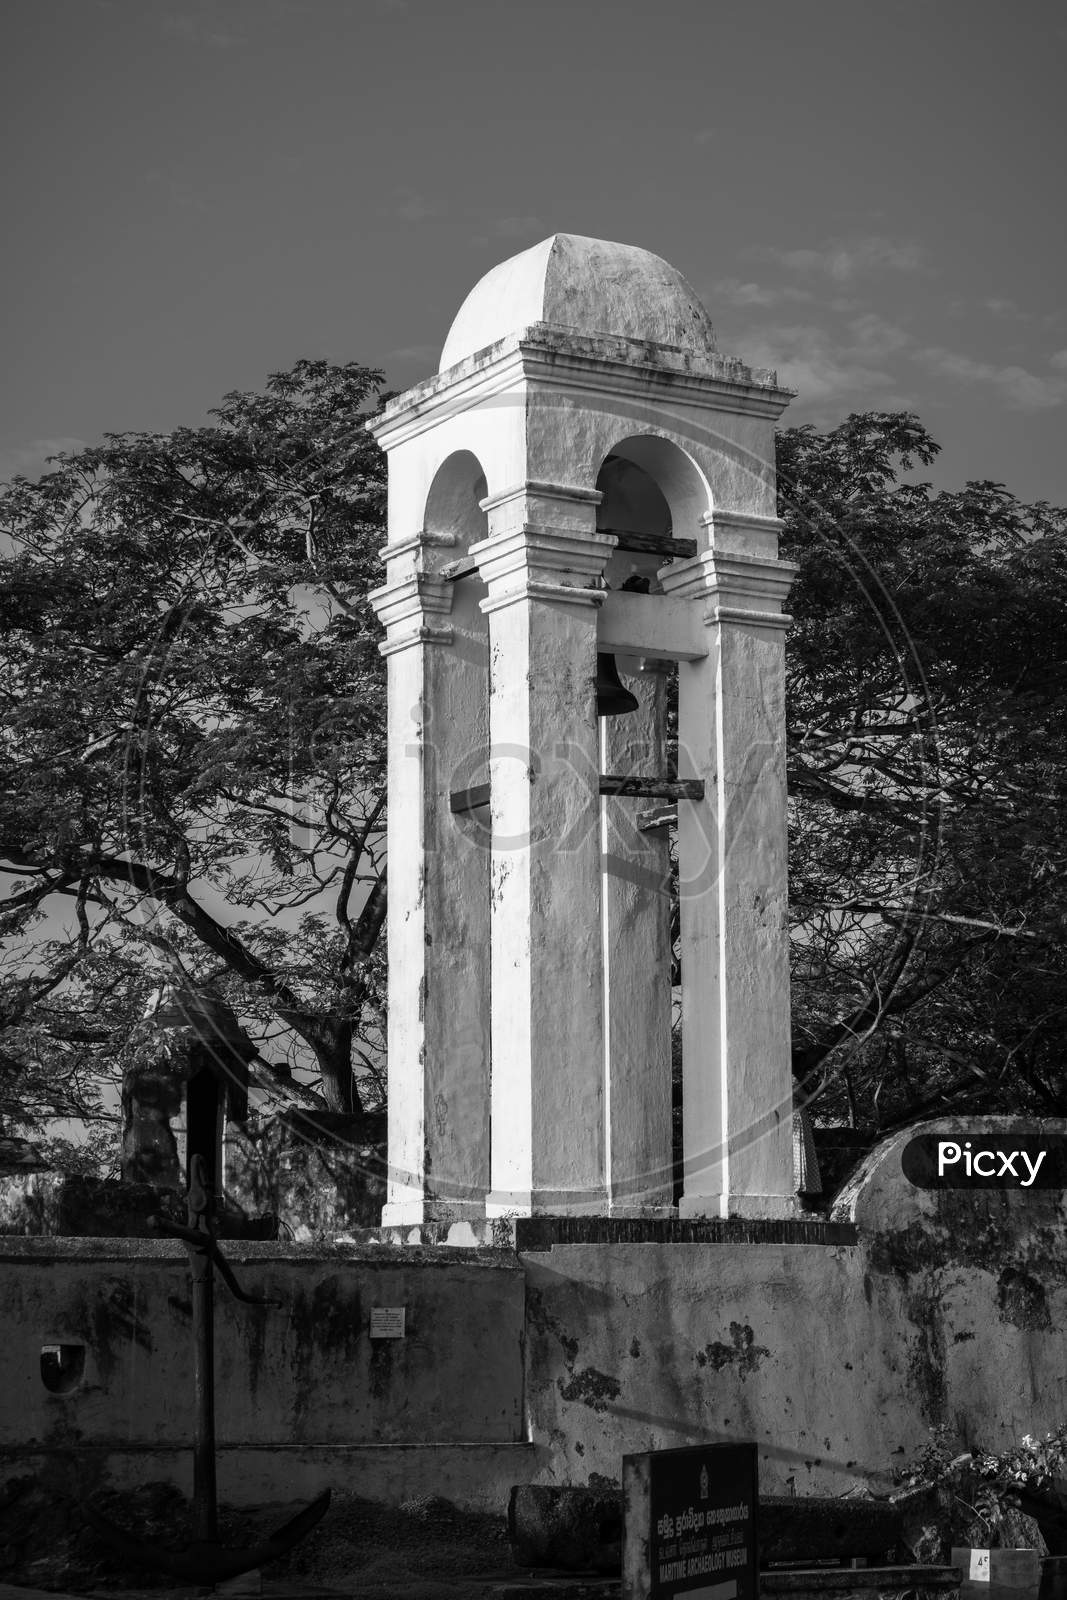 Tall White Bell Tower At The Maritime Museum In Galle Fort Black And White Photograph, Evening Bright Light Hits The Side Of The Tower.